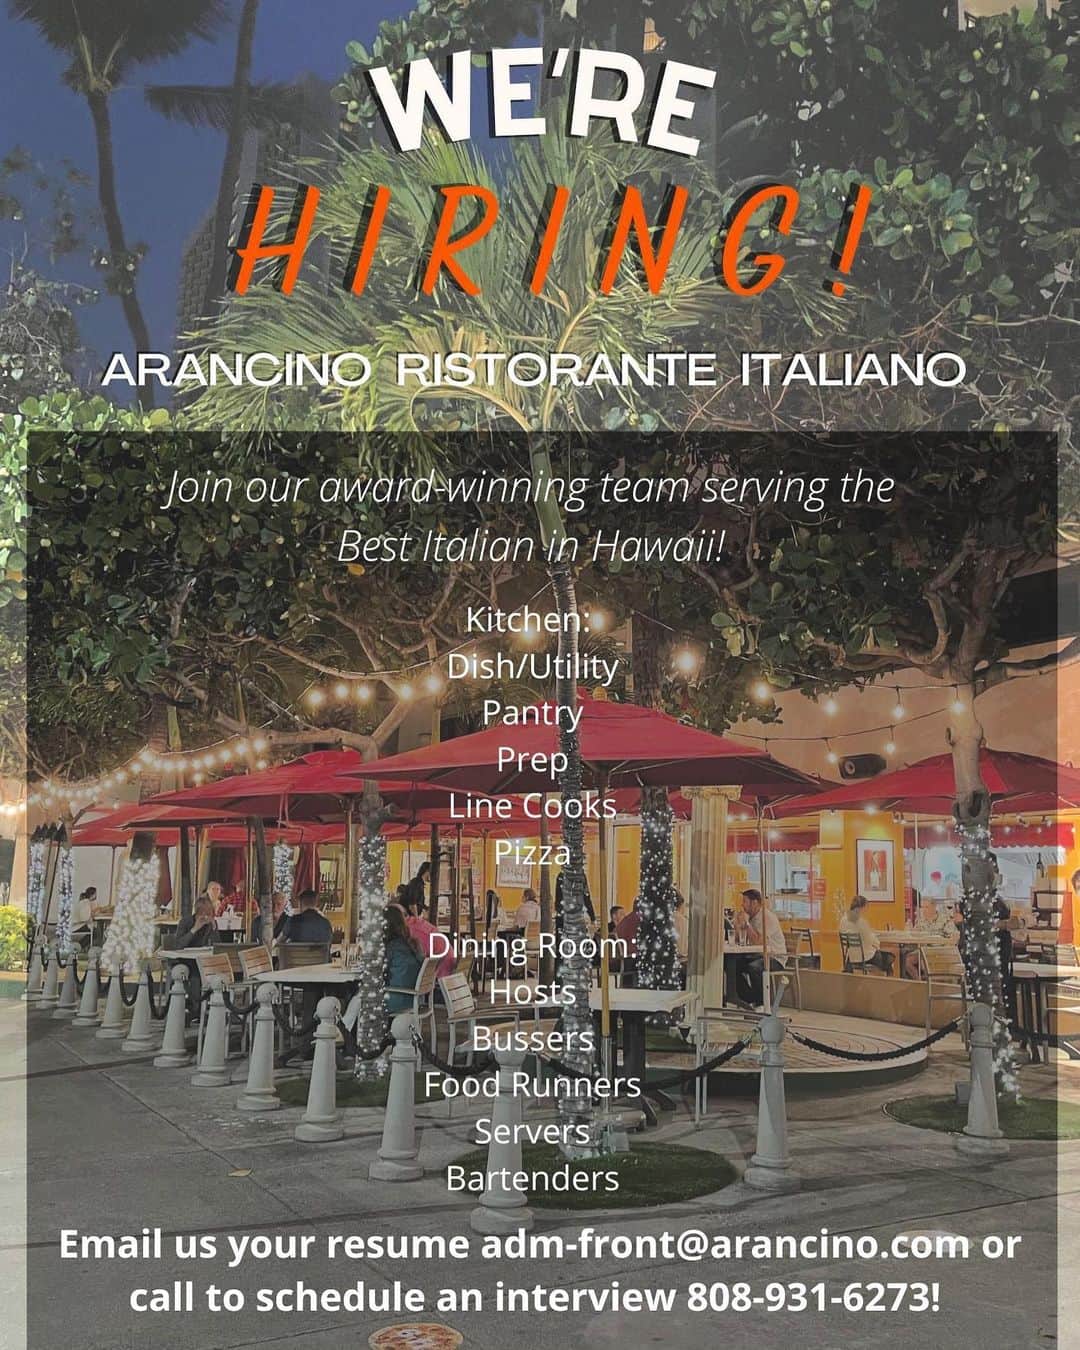 Arancino Di Mareのインスタグラム：「🇮🇹 NOW HIRING! L👀king for Kitchen & FOH staff to join the team! Email us! adm-front@arancino.com or call us @ 808-931-6273! (Located in Waikiki, 2552 Kalakaua Ave Hon HI 96815) 🤙🏾」